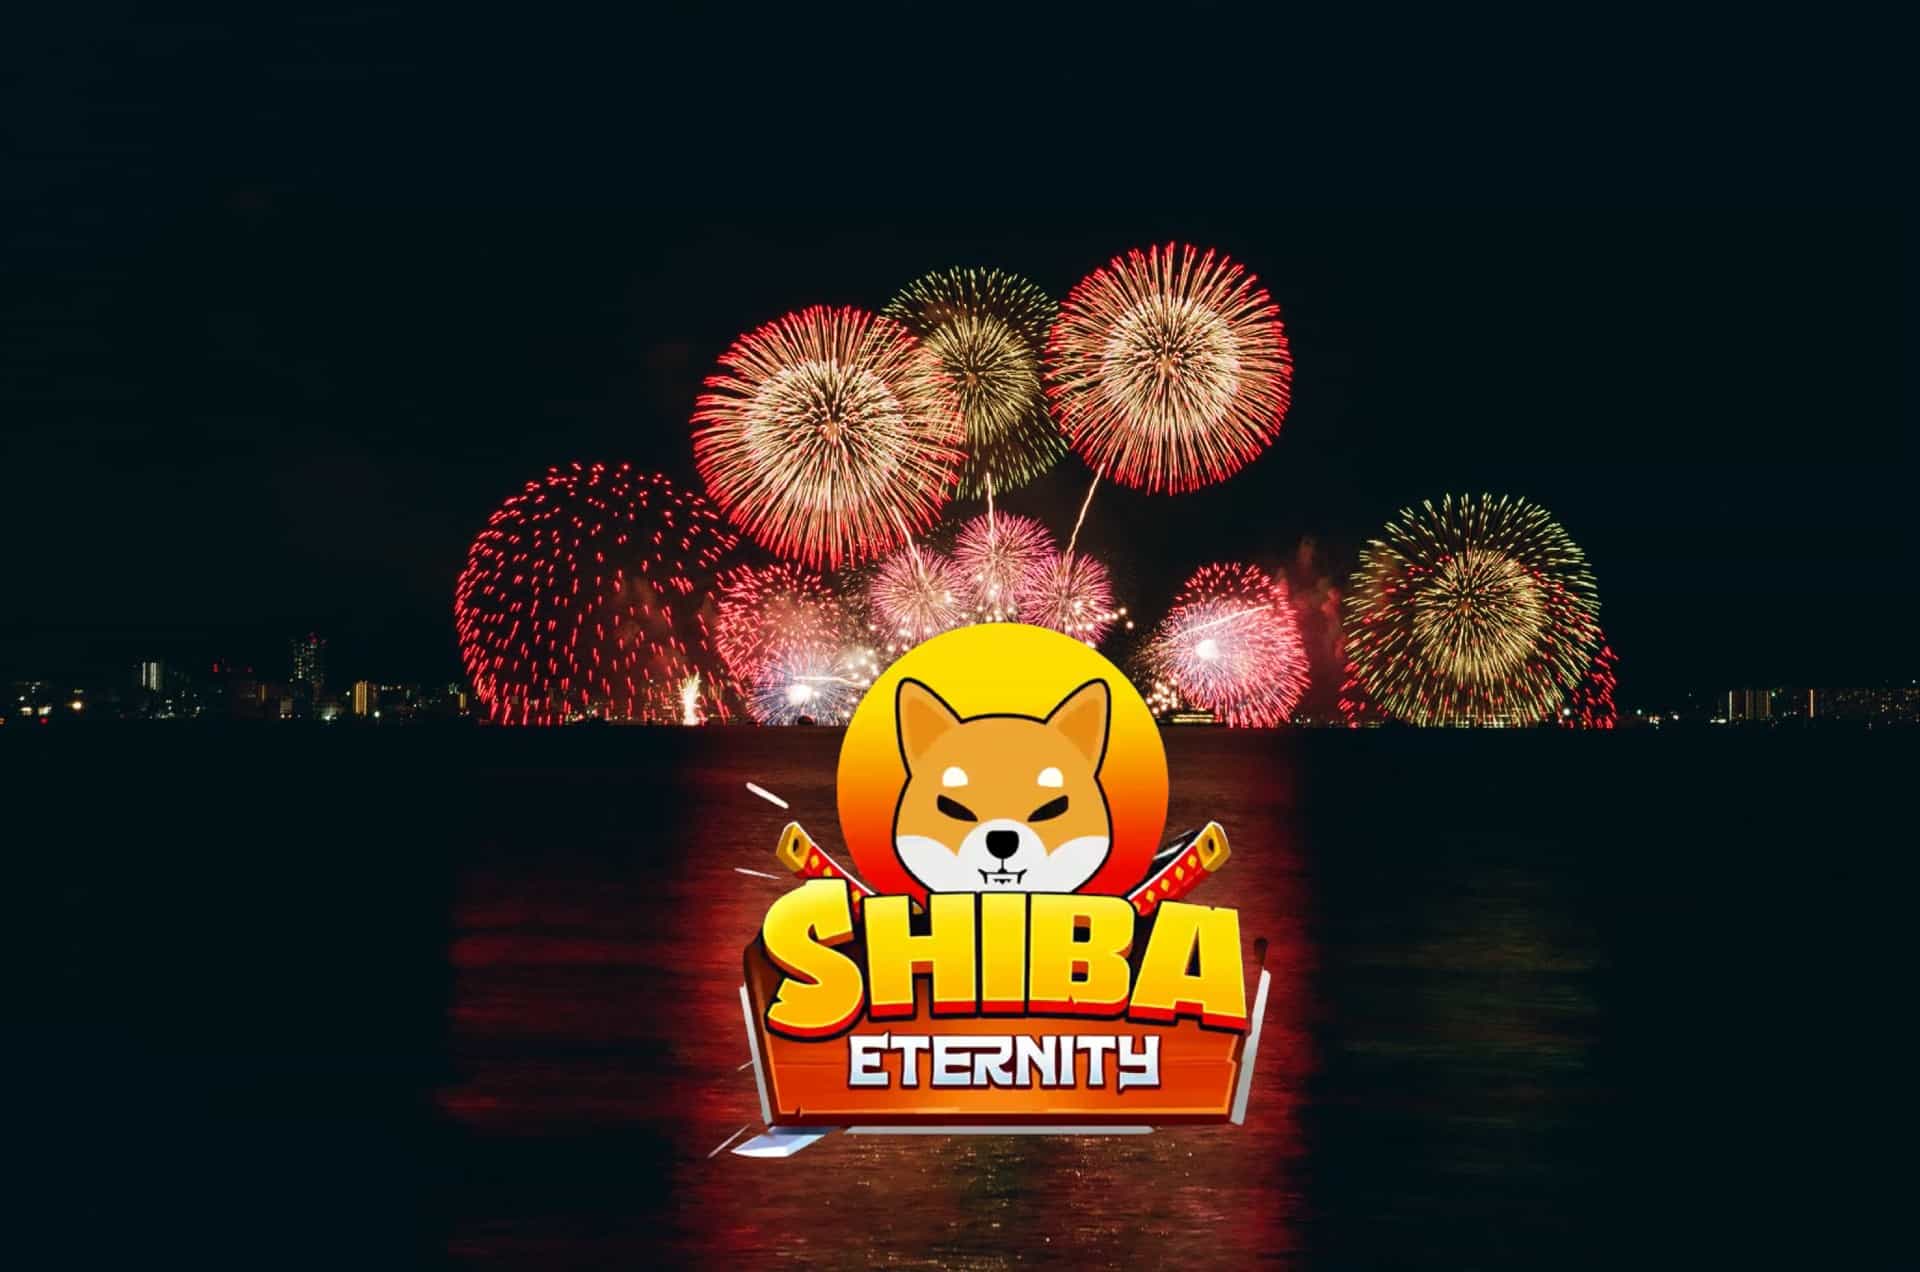 Shiba Eternity Bags 20th Rank on the iOS Store, One Day After the Launch